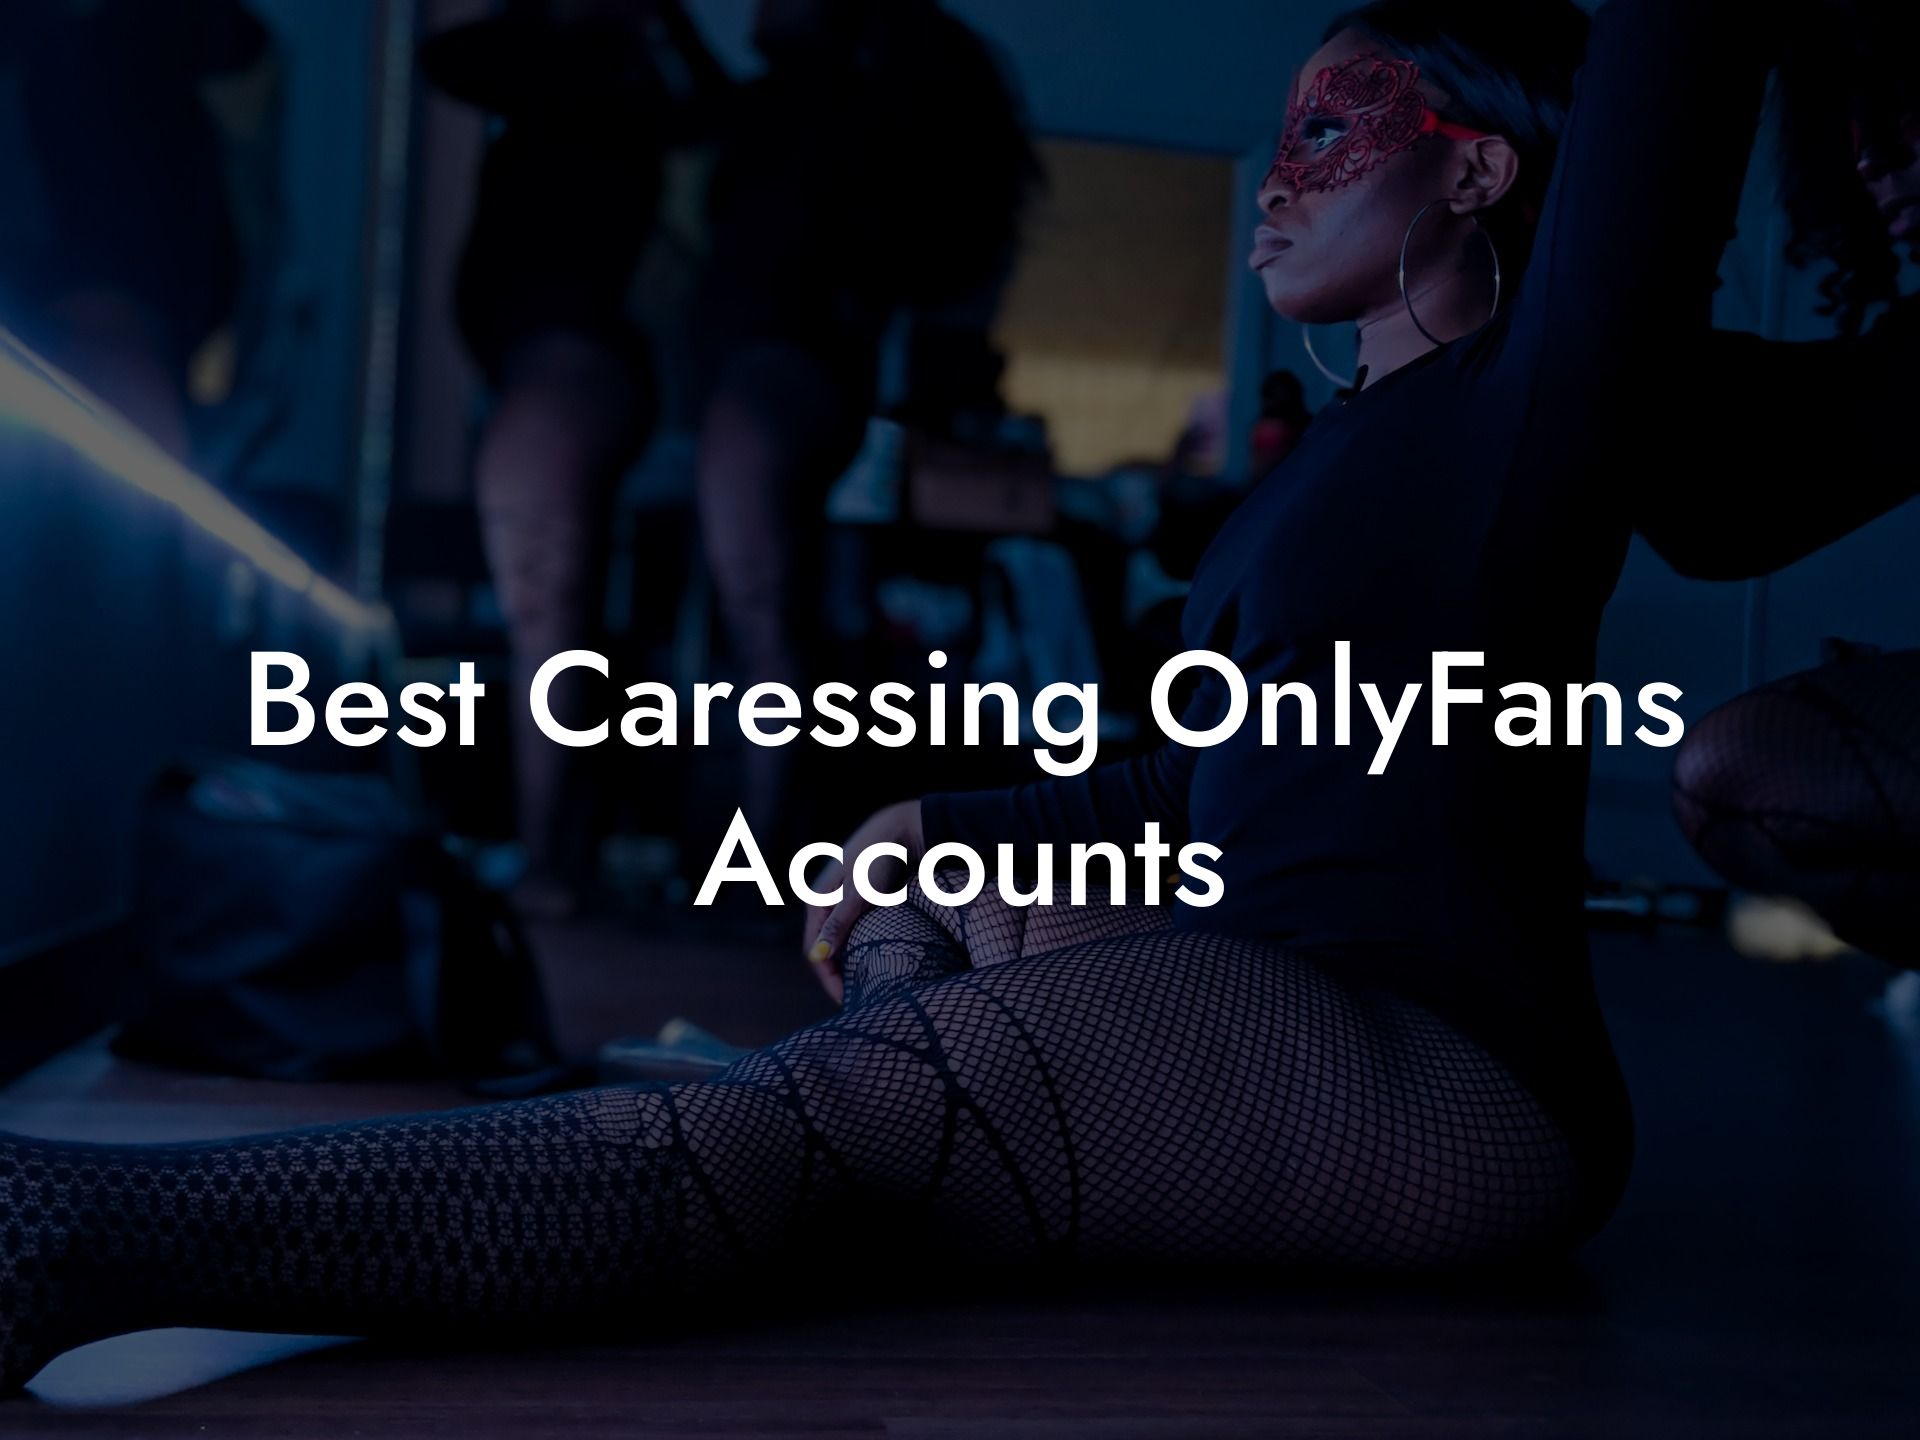 Best Caressing OnlyFans Accounts